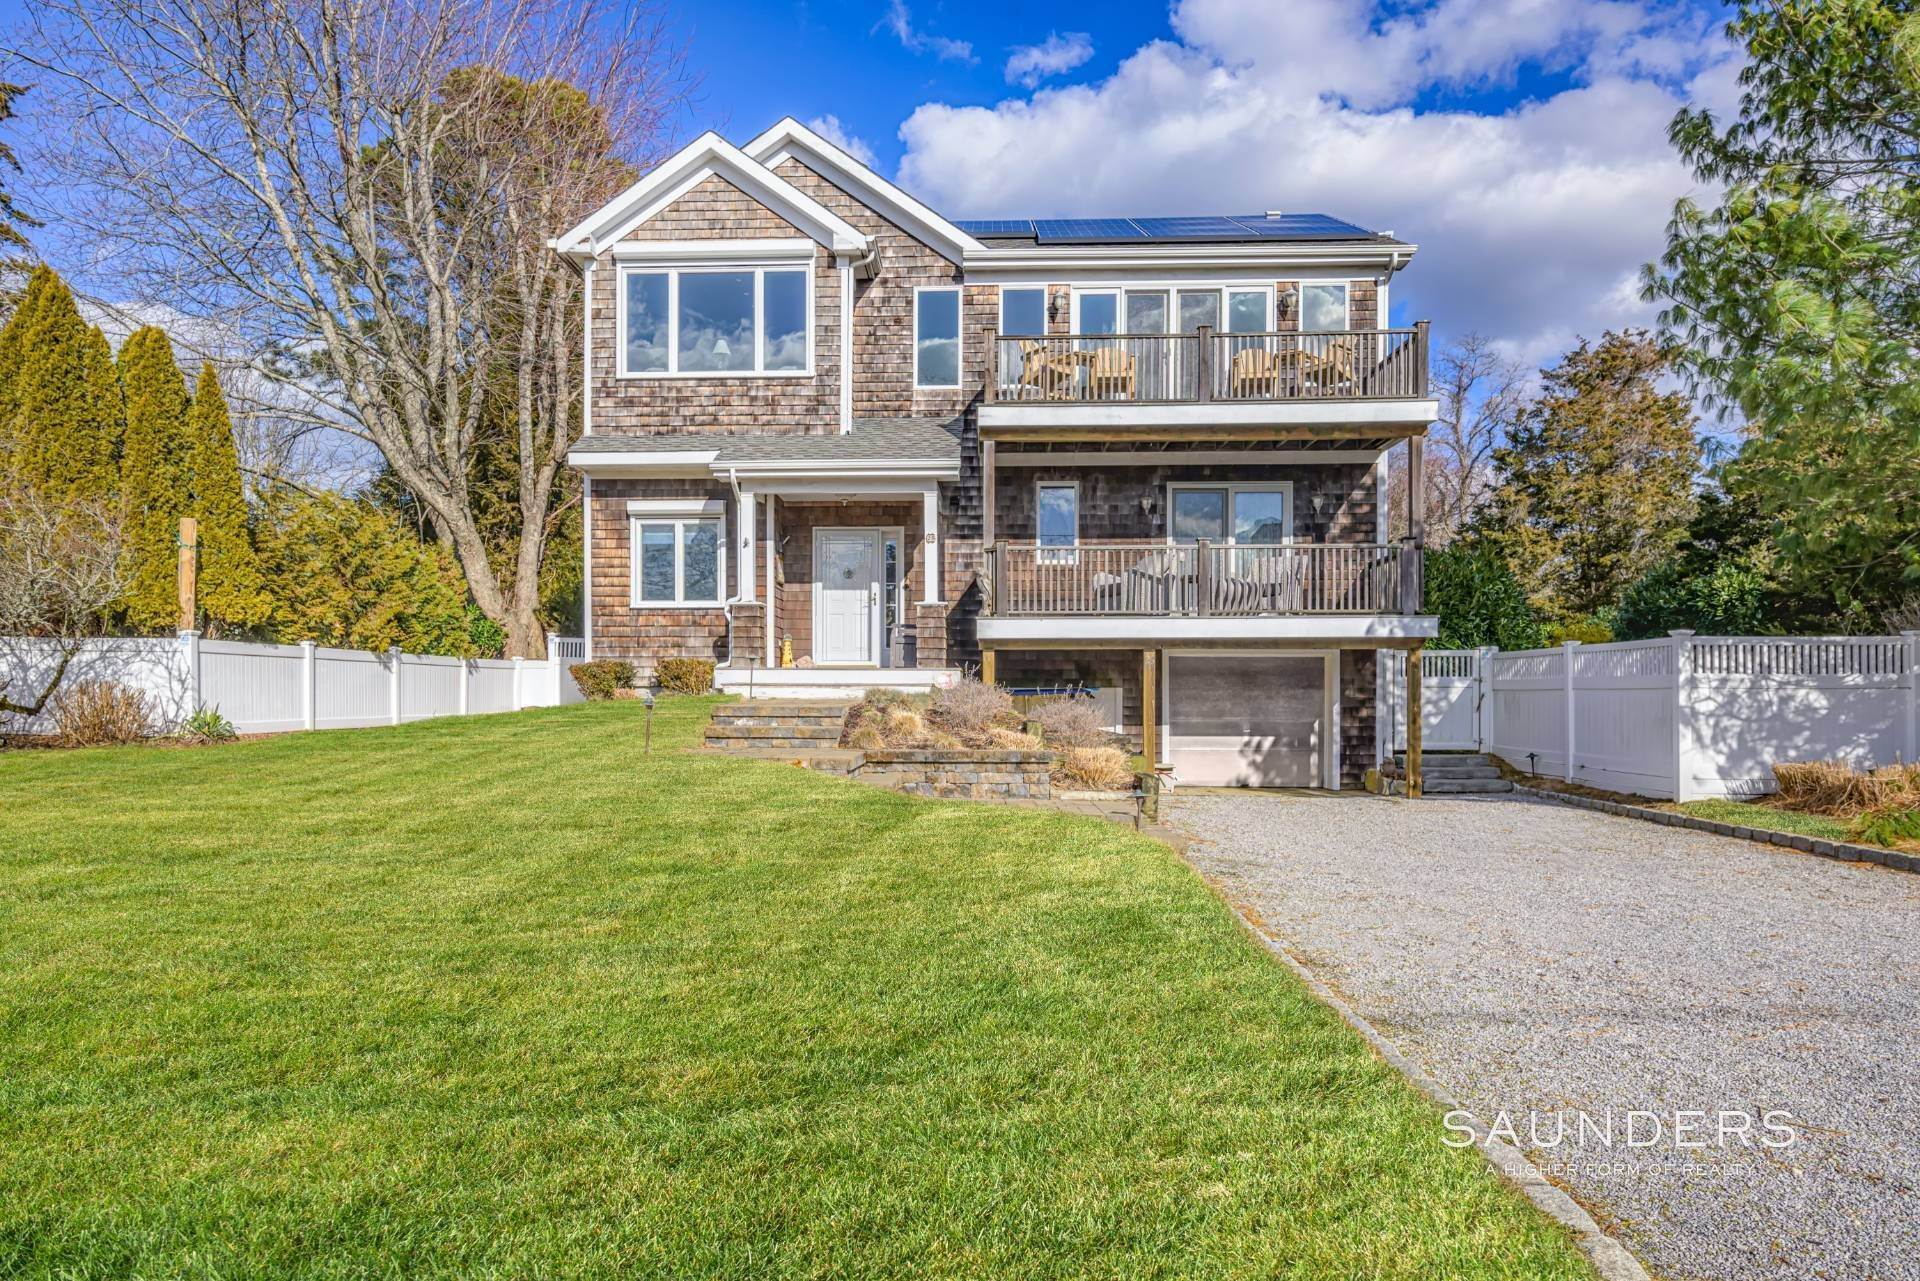 Single Family Homes for Sale at Hamptons Waterview 25 Oceanview Drive, Shinnecock Hills, Southampton, NY 11968